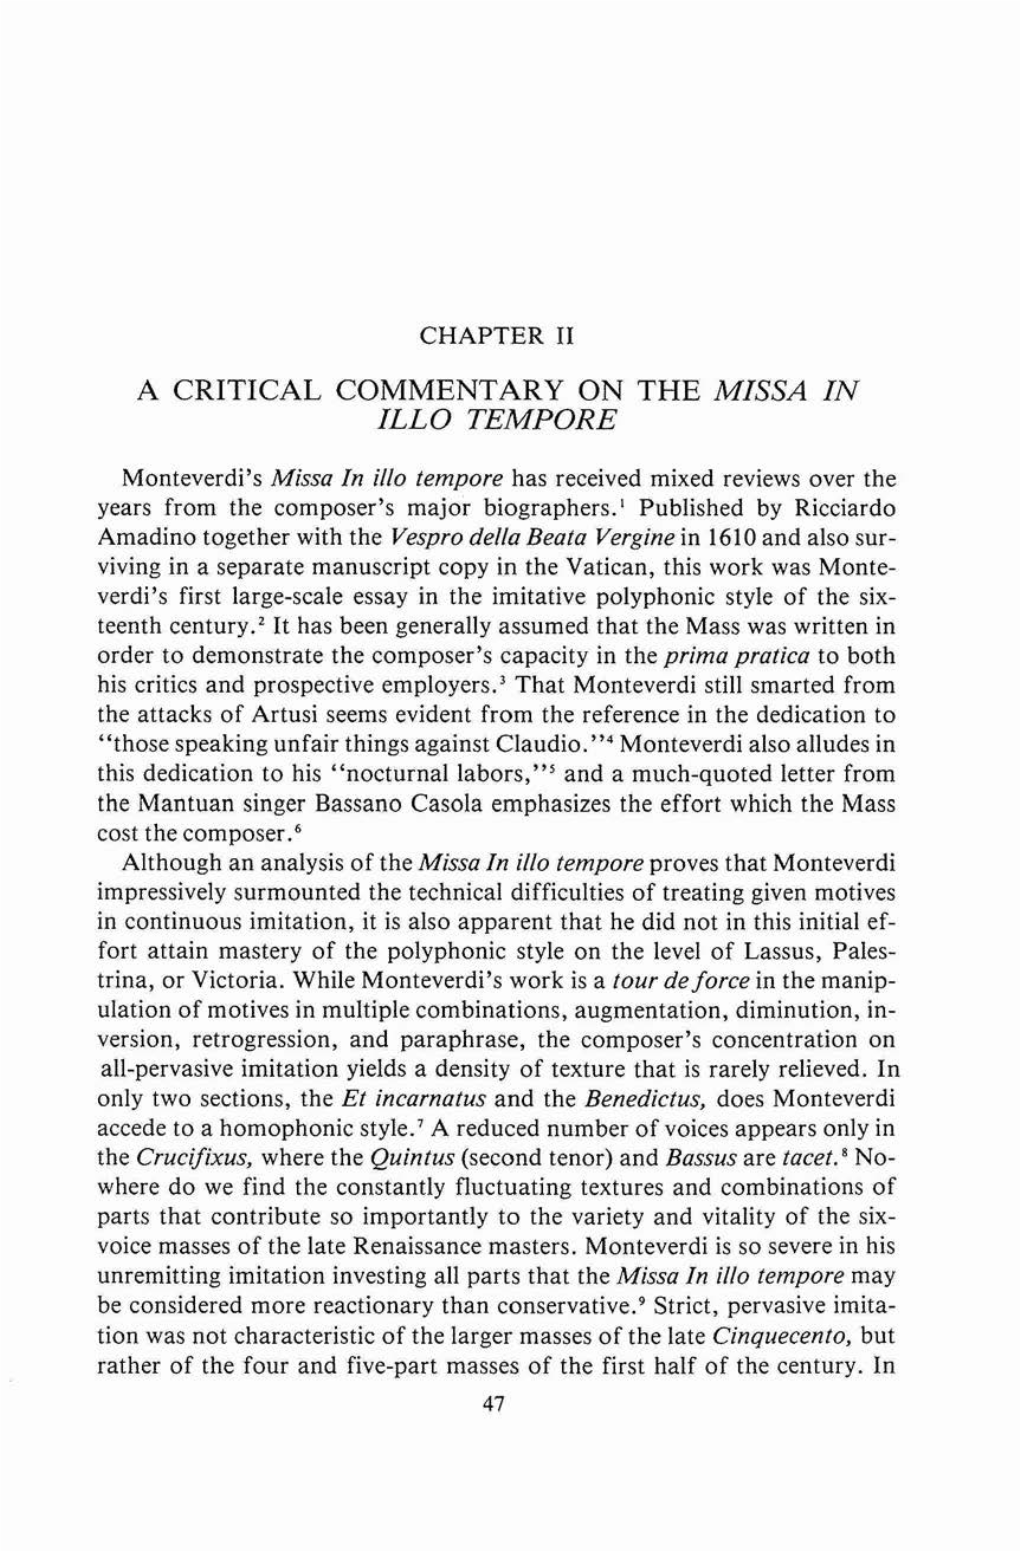 A Critical Commentary on the Missa in Ill0 Tempore